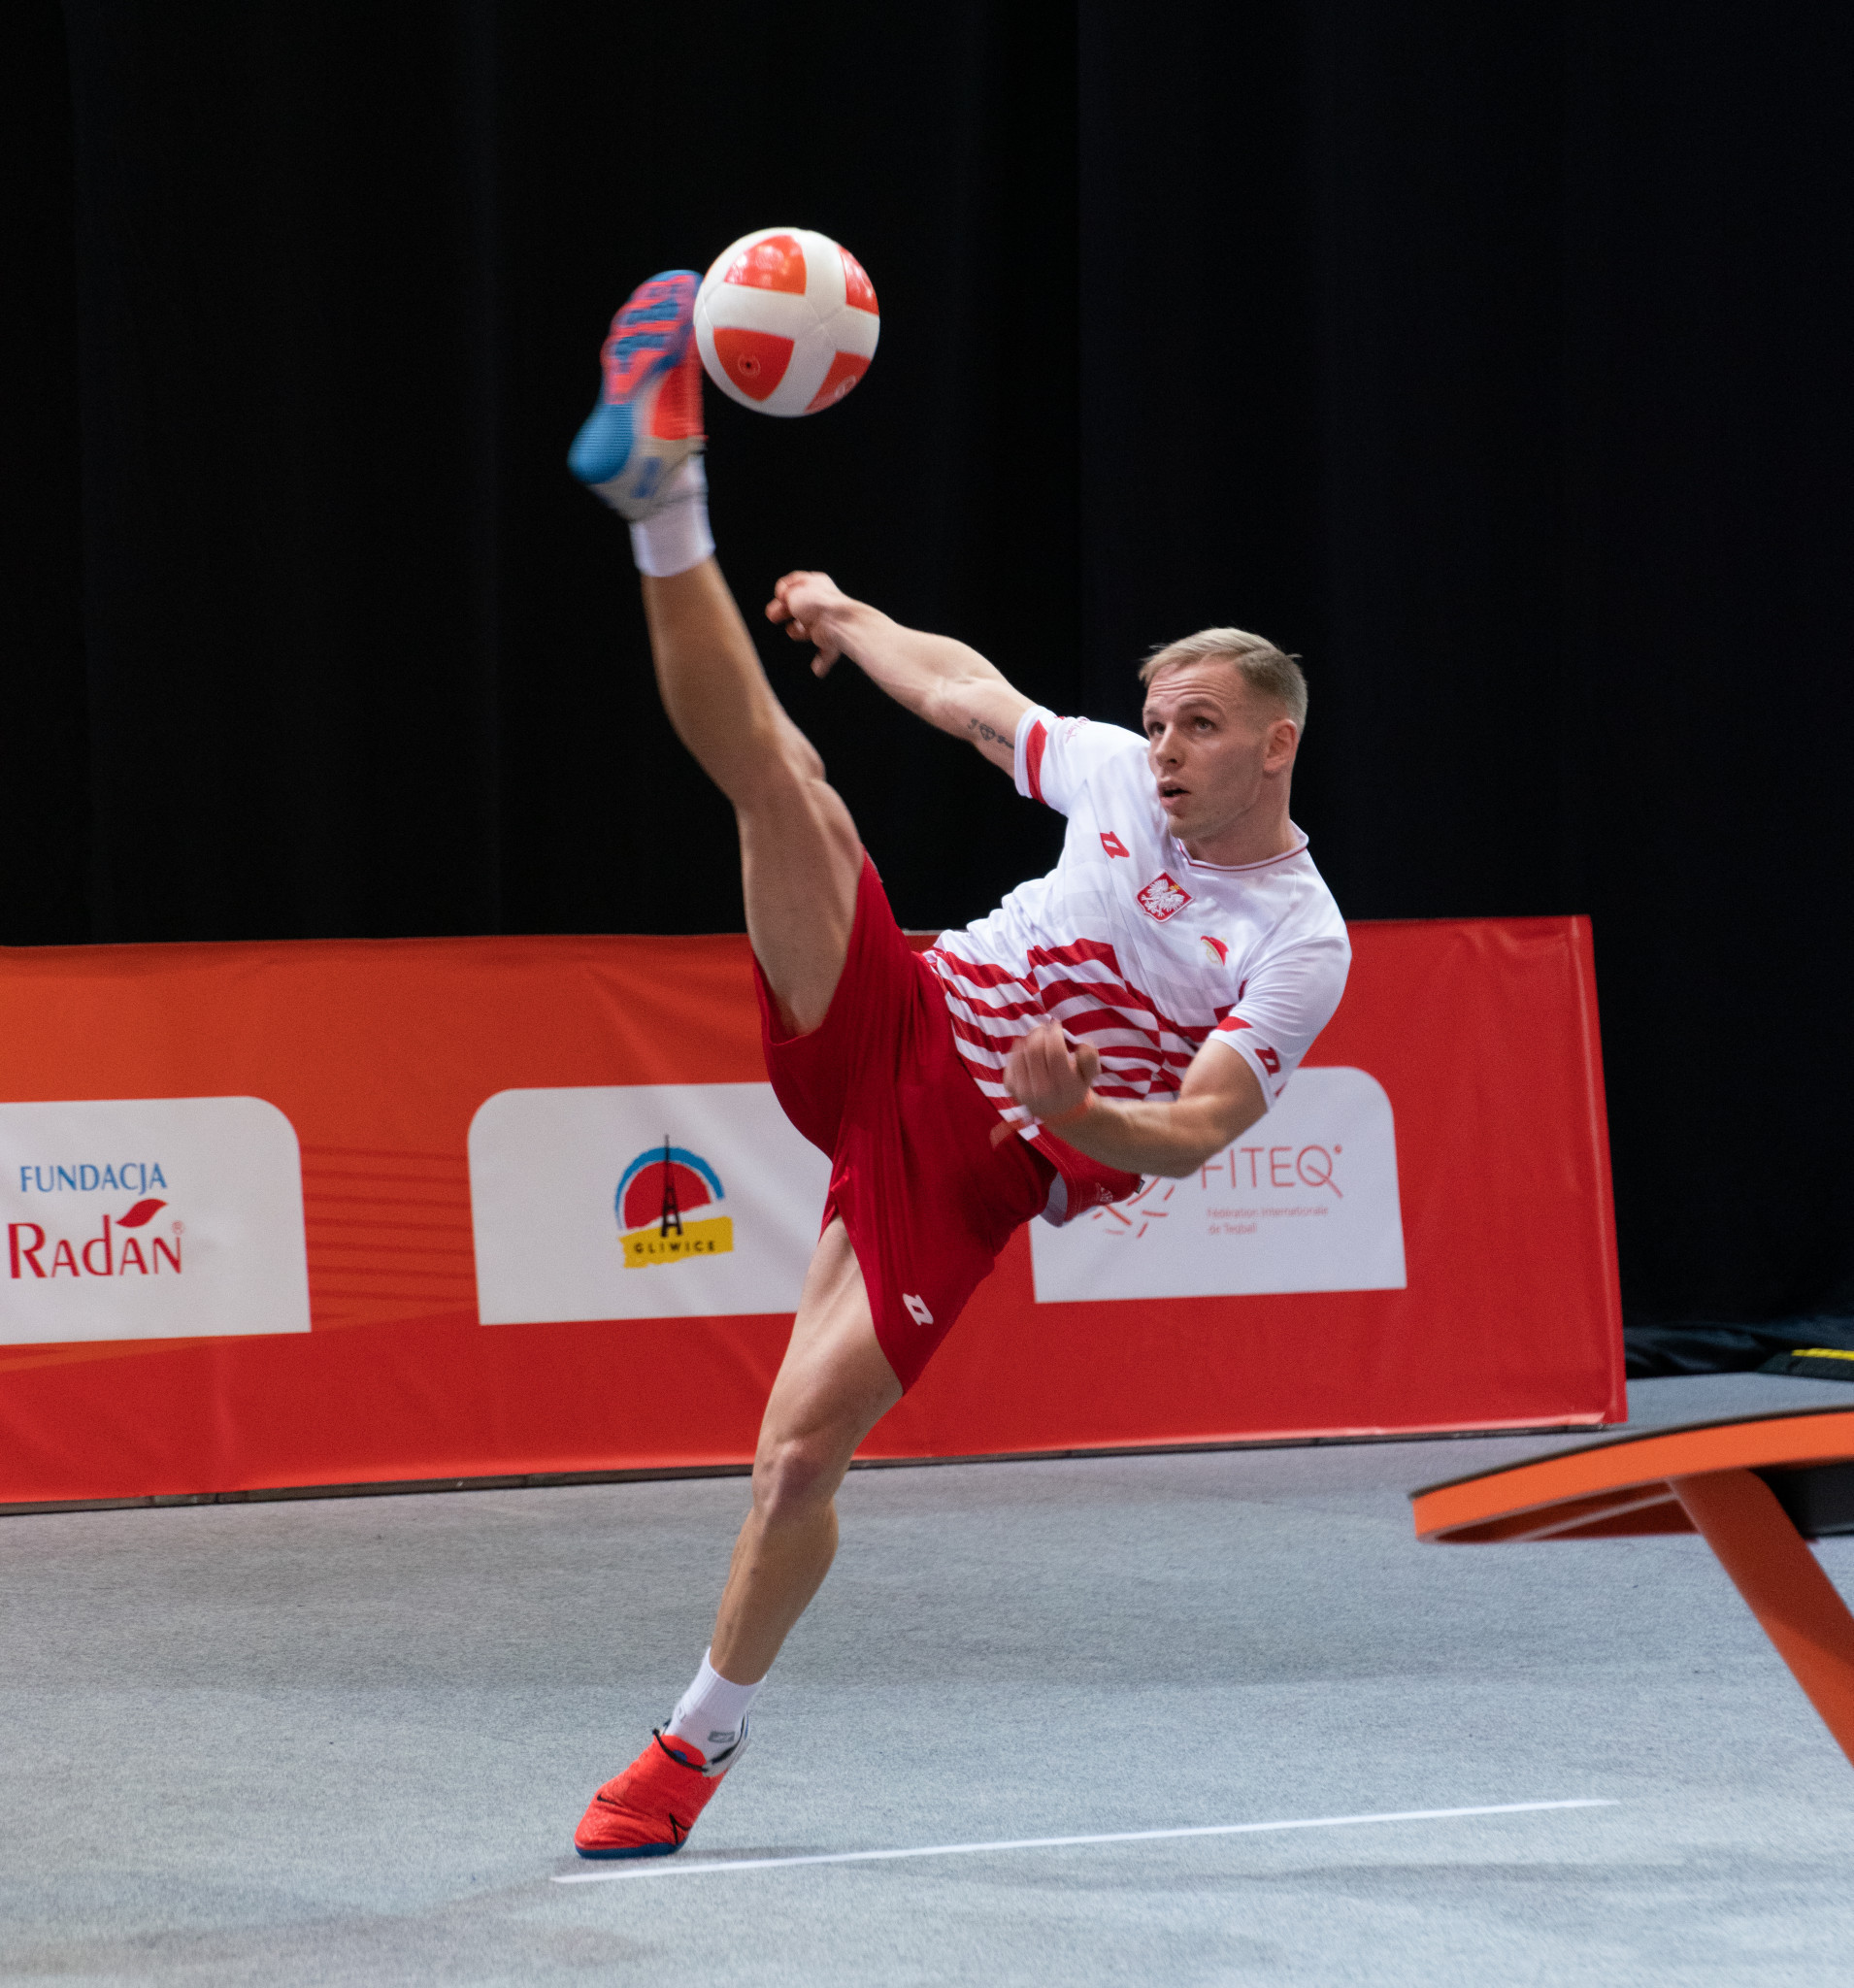 Poland is proving a hotbed for teqball, with the sport due to feature as a medal event at next year's European Games ©FITEQ